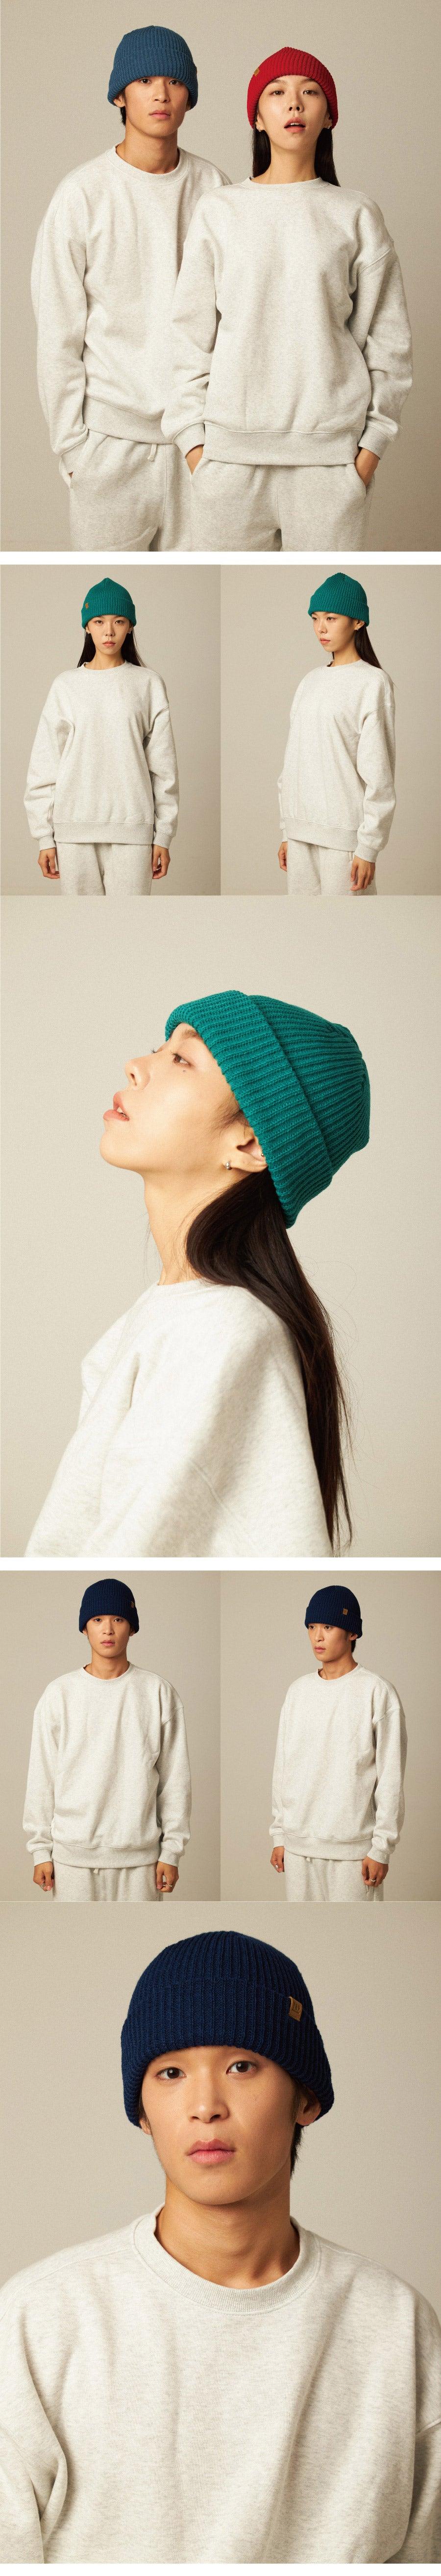 【BTS V TAE HYUNG WEAR】 STANDARD BEANIE / 14 COLORS - Shopping Around the World with Goodsnjoy